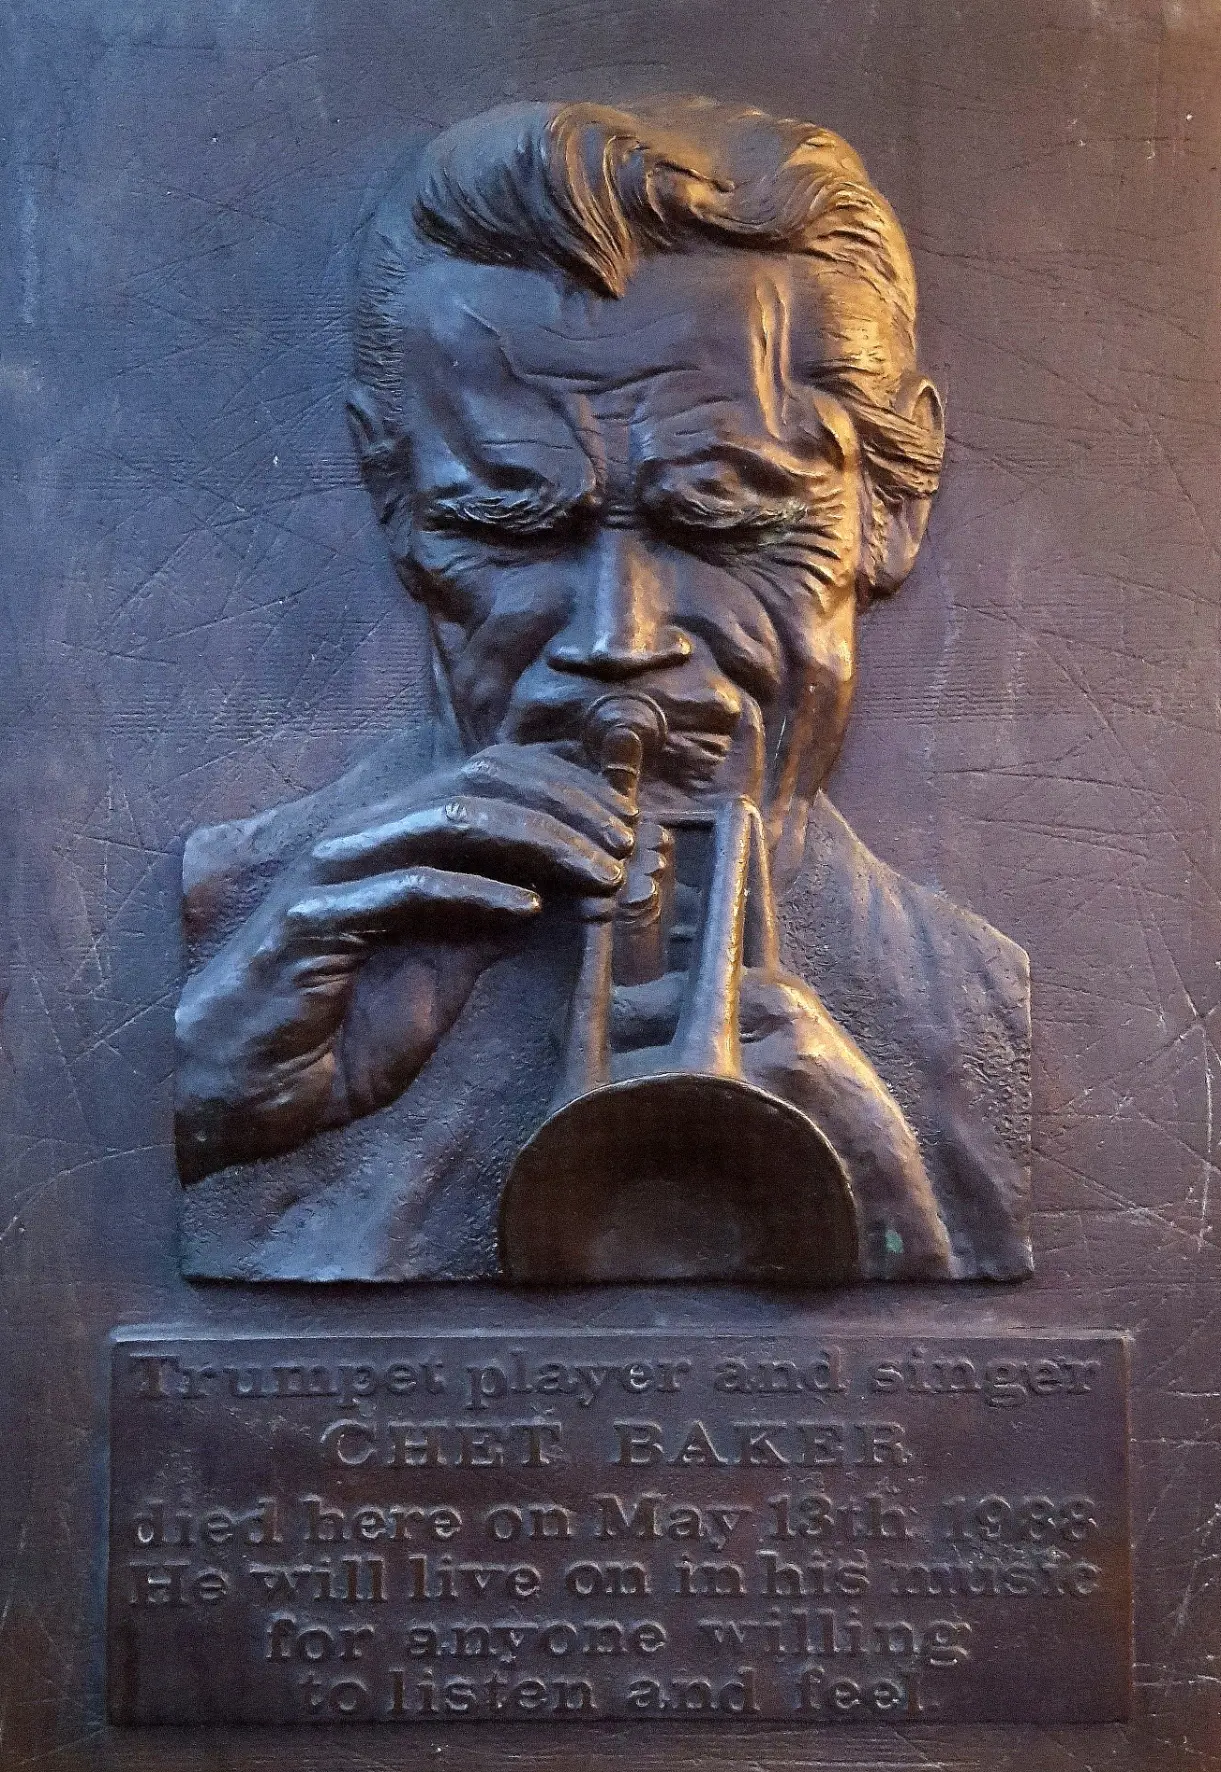 Cocaine is cited frequently in lists of drug related celebrity deaths (see Section 4.3.5). I ran across this plaque outside the Hotel Prins Hendrik in Amsterdam, from which jazz legend Chet Baker accidentally fell to his death with both cocaine and heroin present in his system.